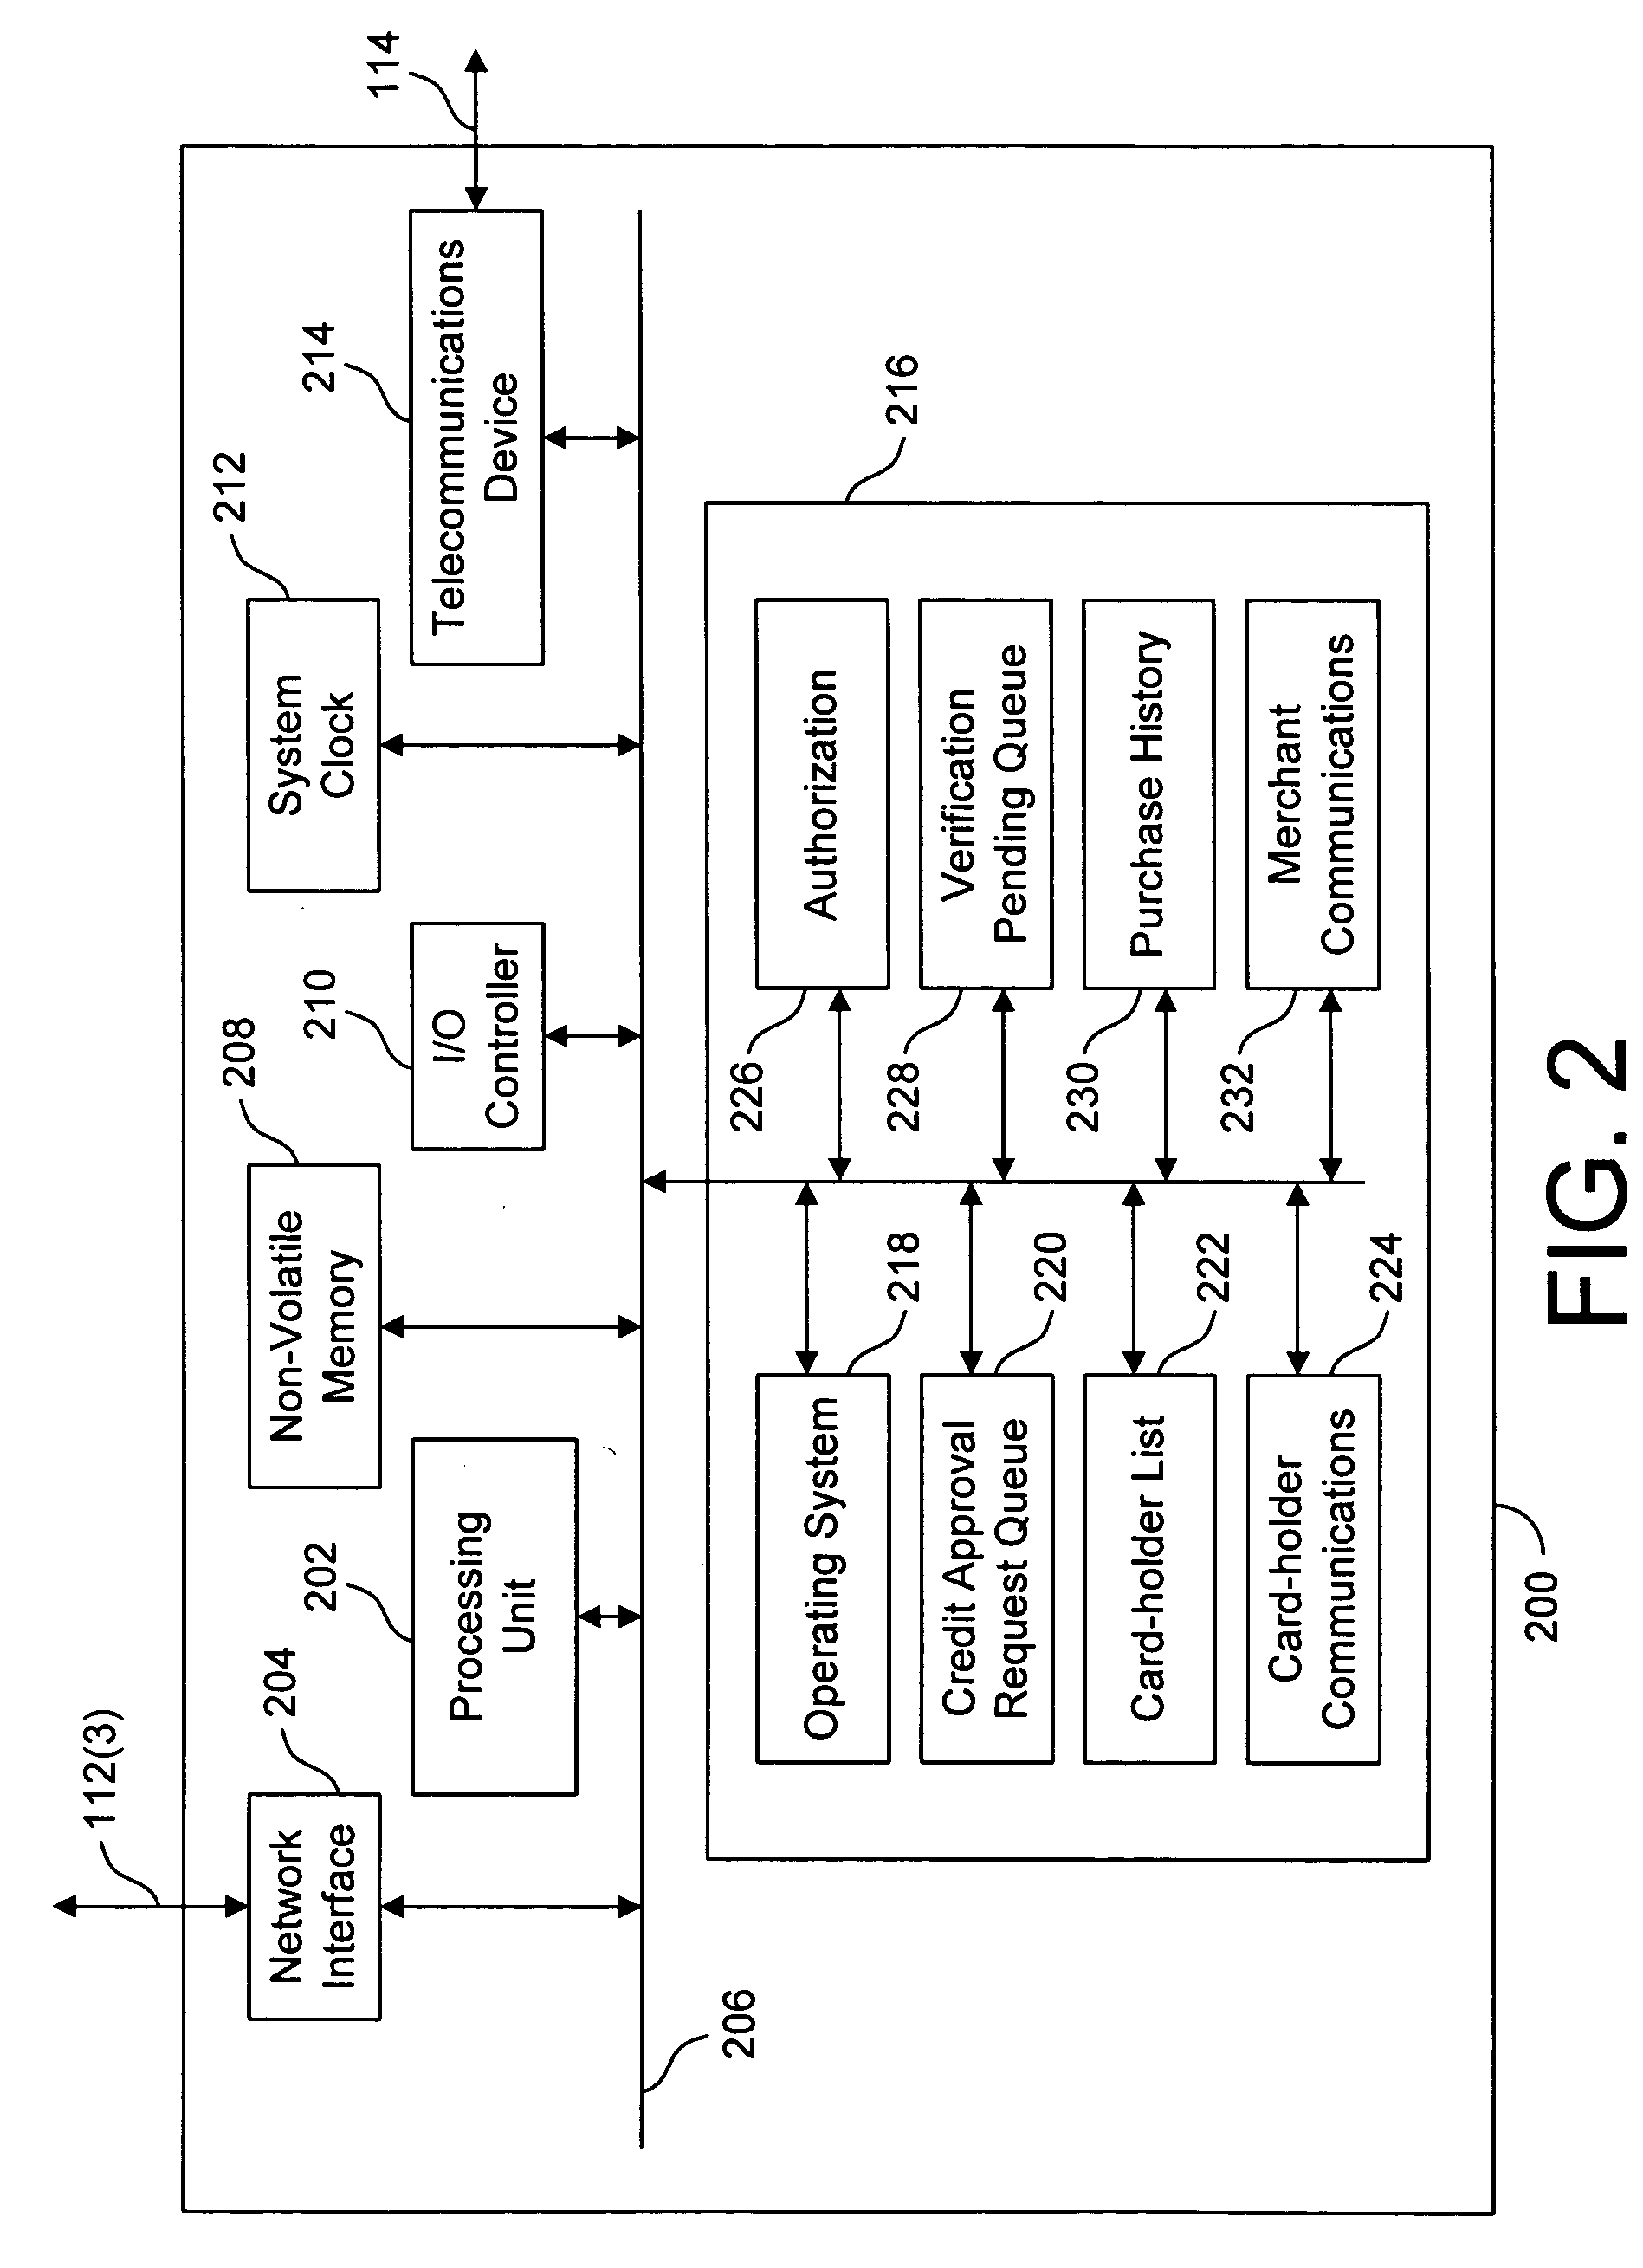 System and method for securing a credit account